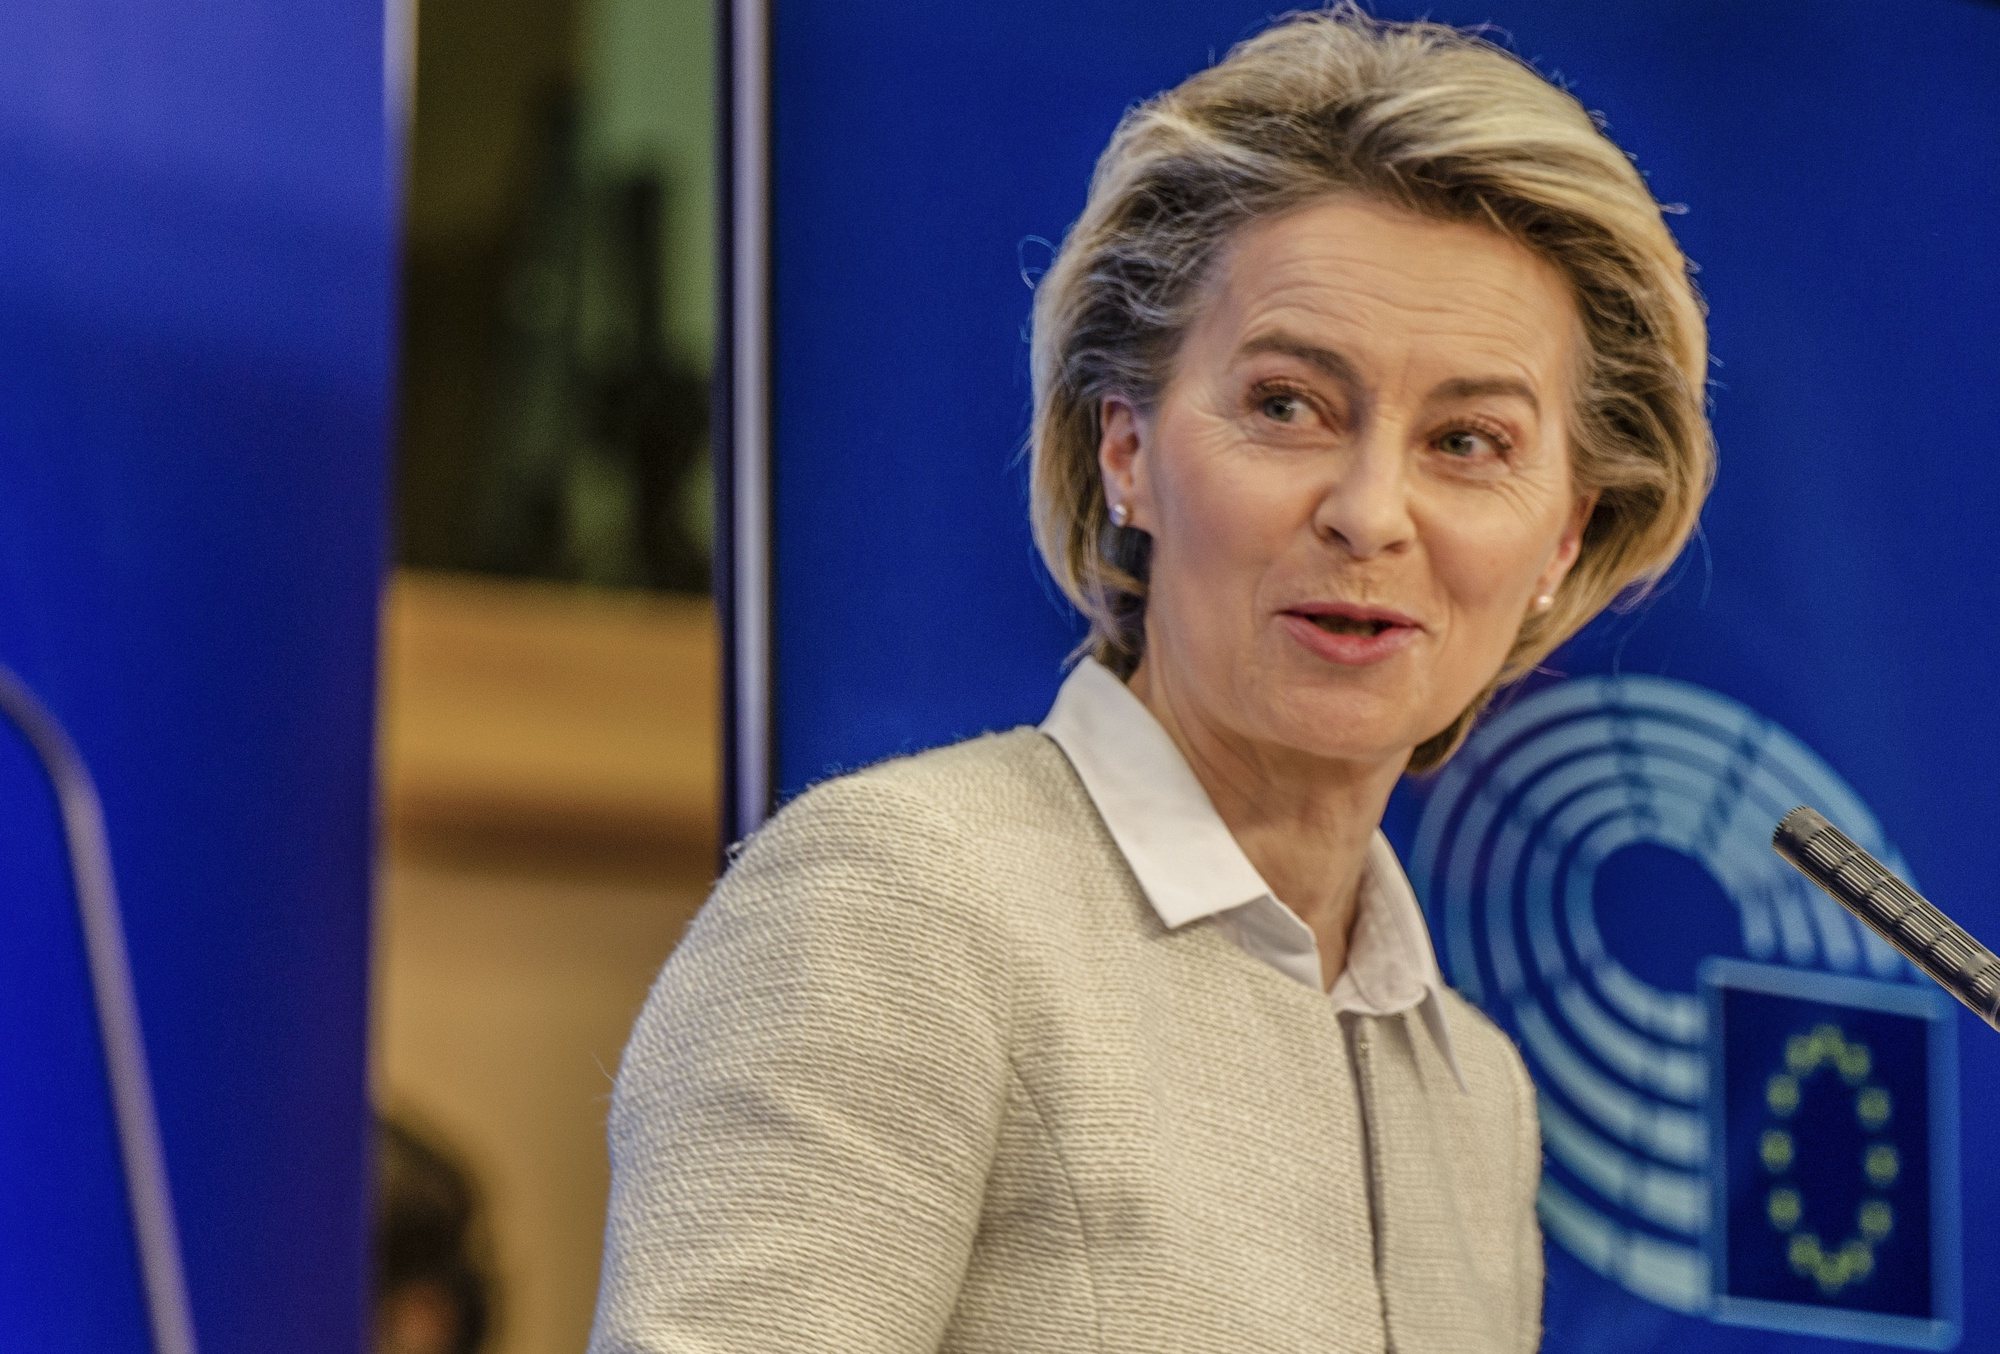 Commission President Ursula von der Leyen attends a press conference after signing the Recovery and Resilience Facility (RRF) agreement in Brussels, Belgium, 12 February 2021. The European Parliament greenlighted the EU&#039;s proposed Recovery and Resilience Facility (RRF), worth 672.5 billion euros to tackle the economic aftermath of the coronavirus pandemic, during its plenary session in Brussels on 10 February 2021. TONY DA SILVA/LUSA